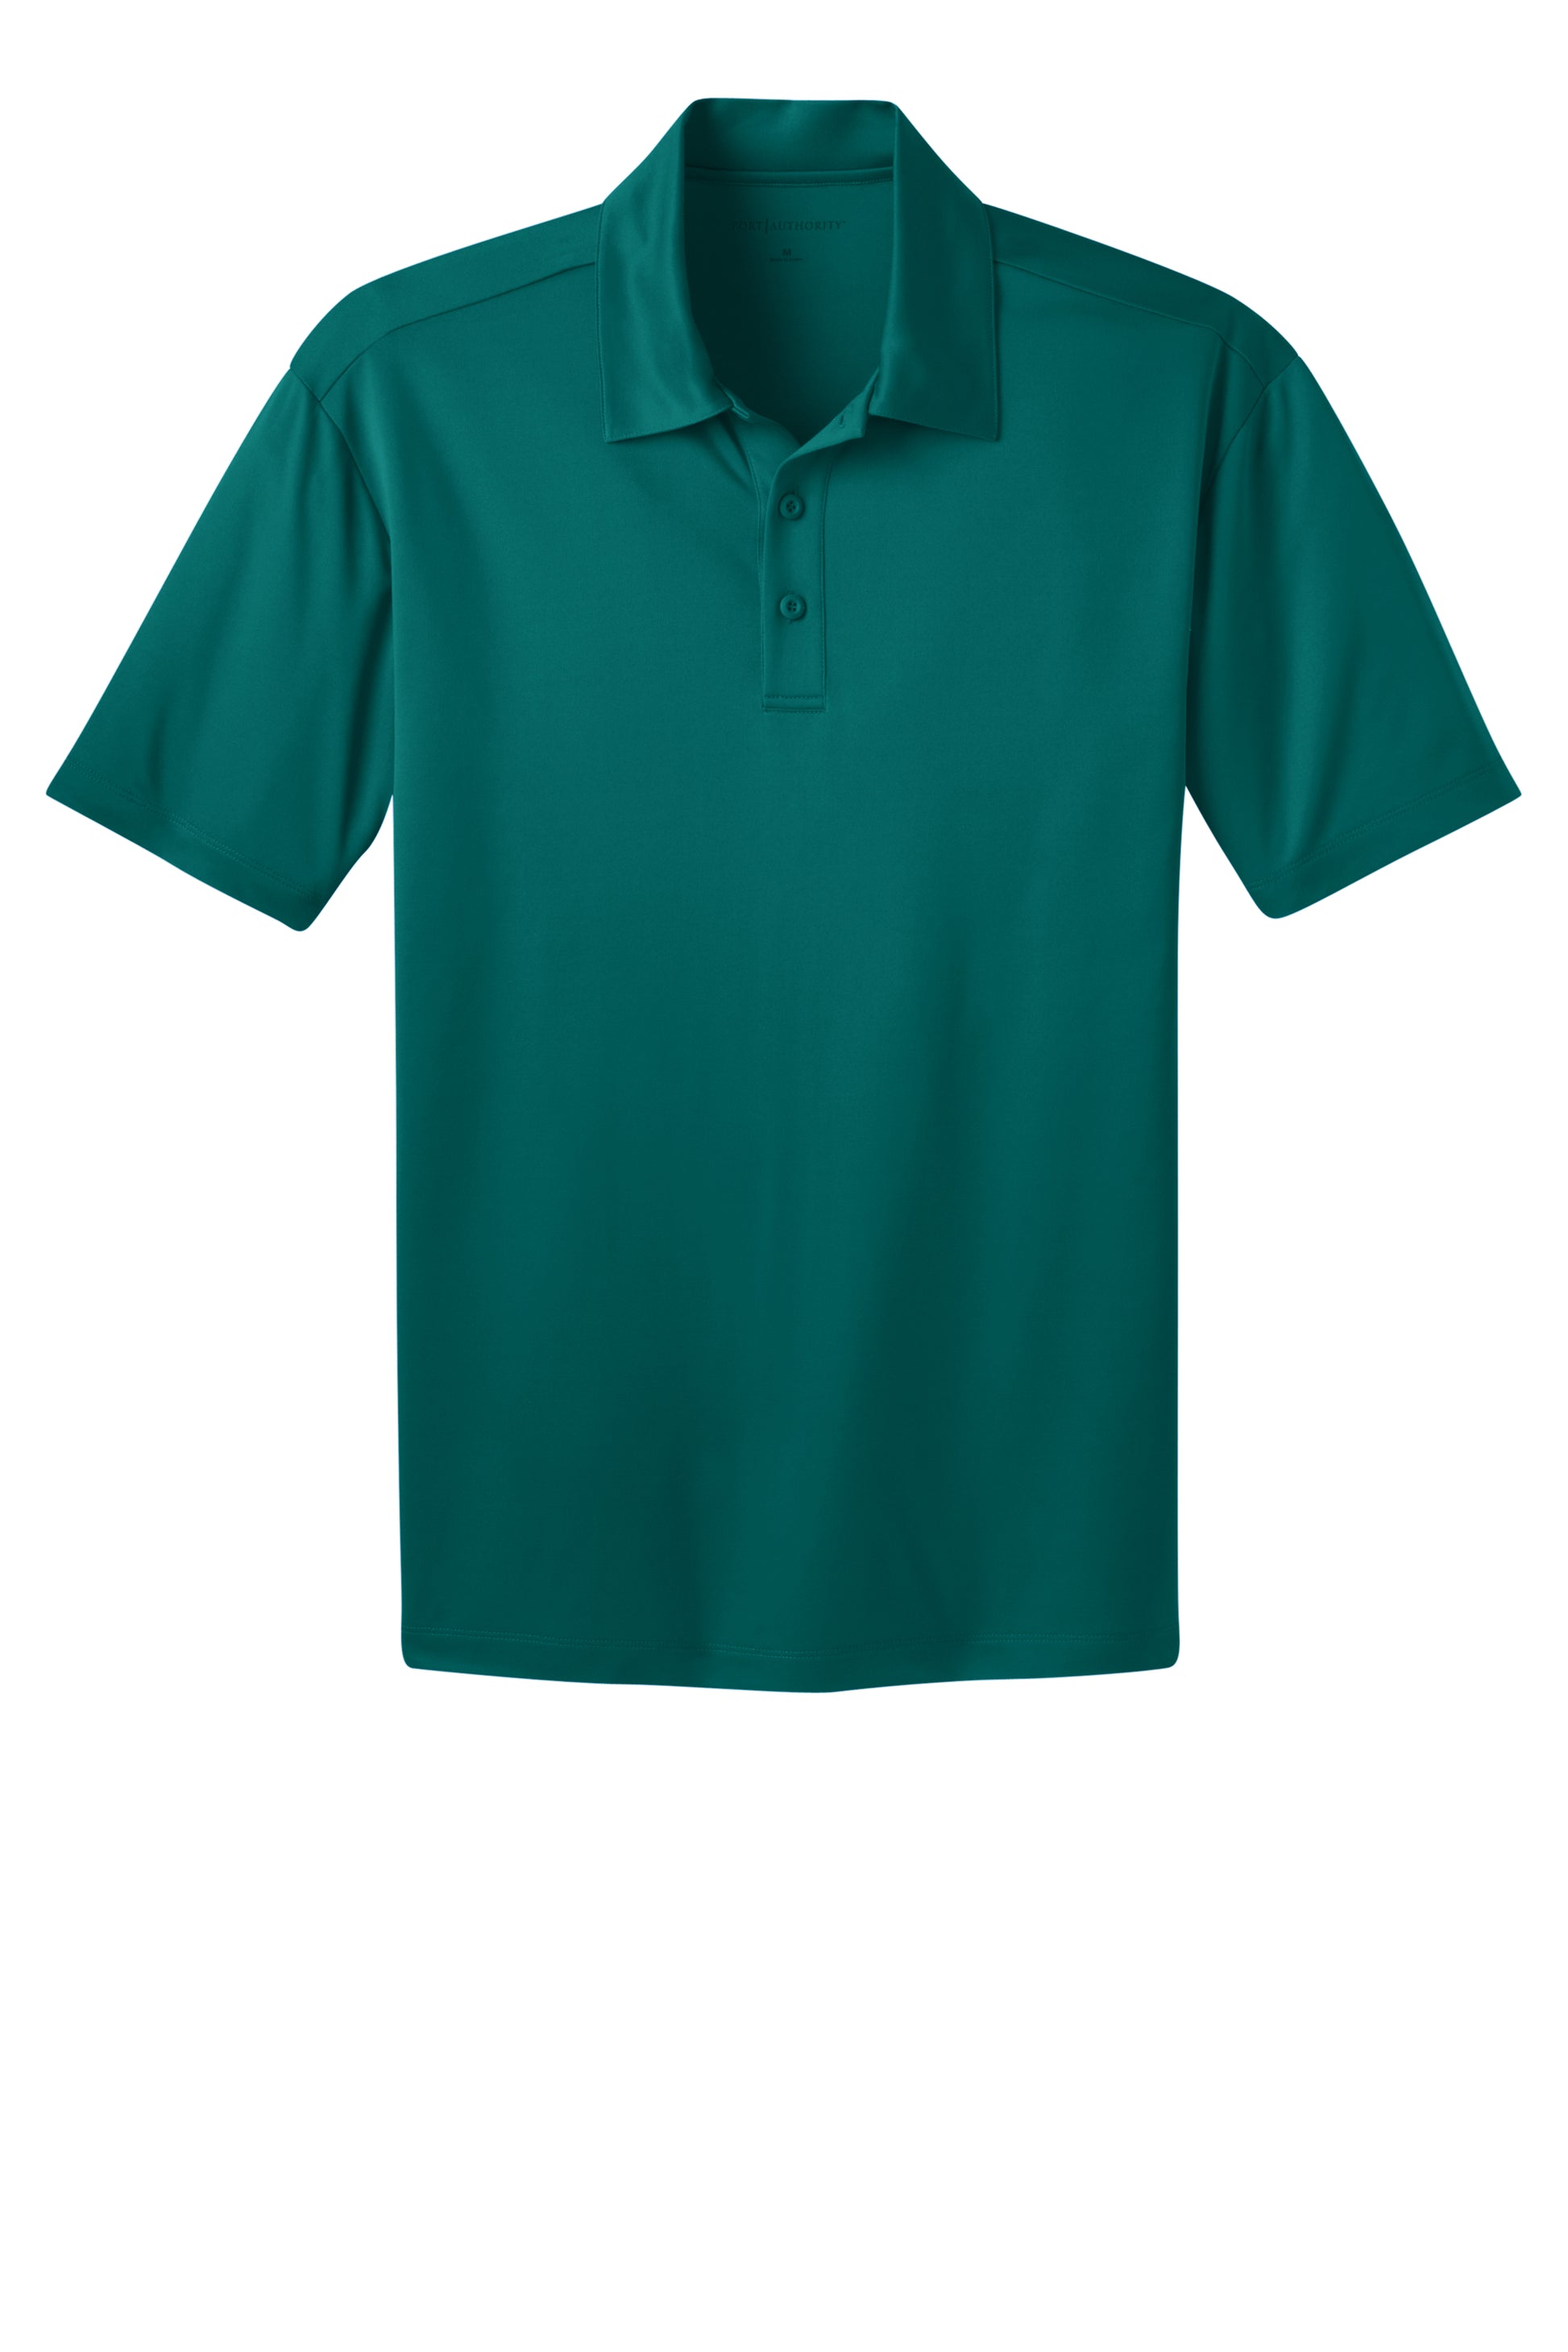 port authority silk touch polo teal green